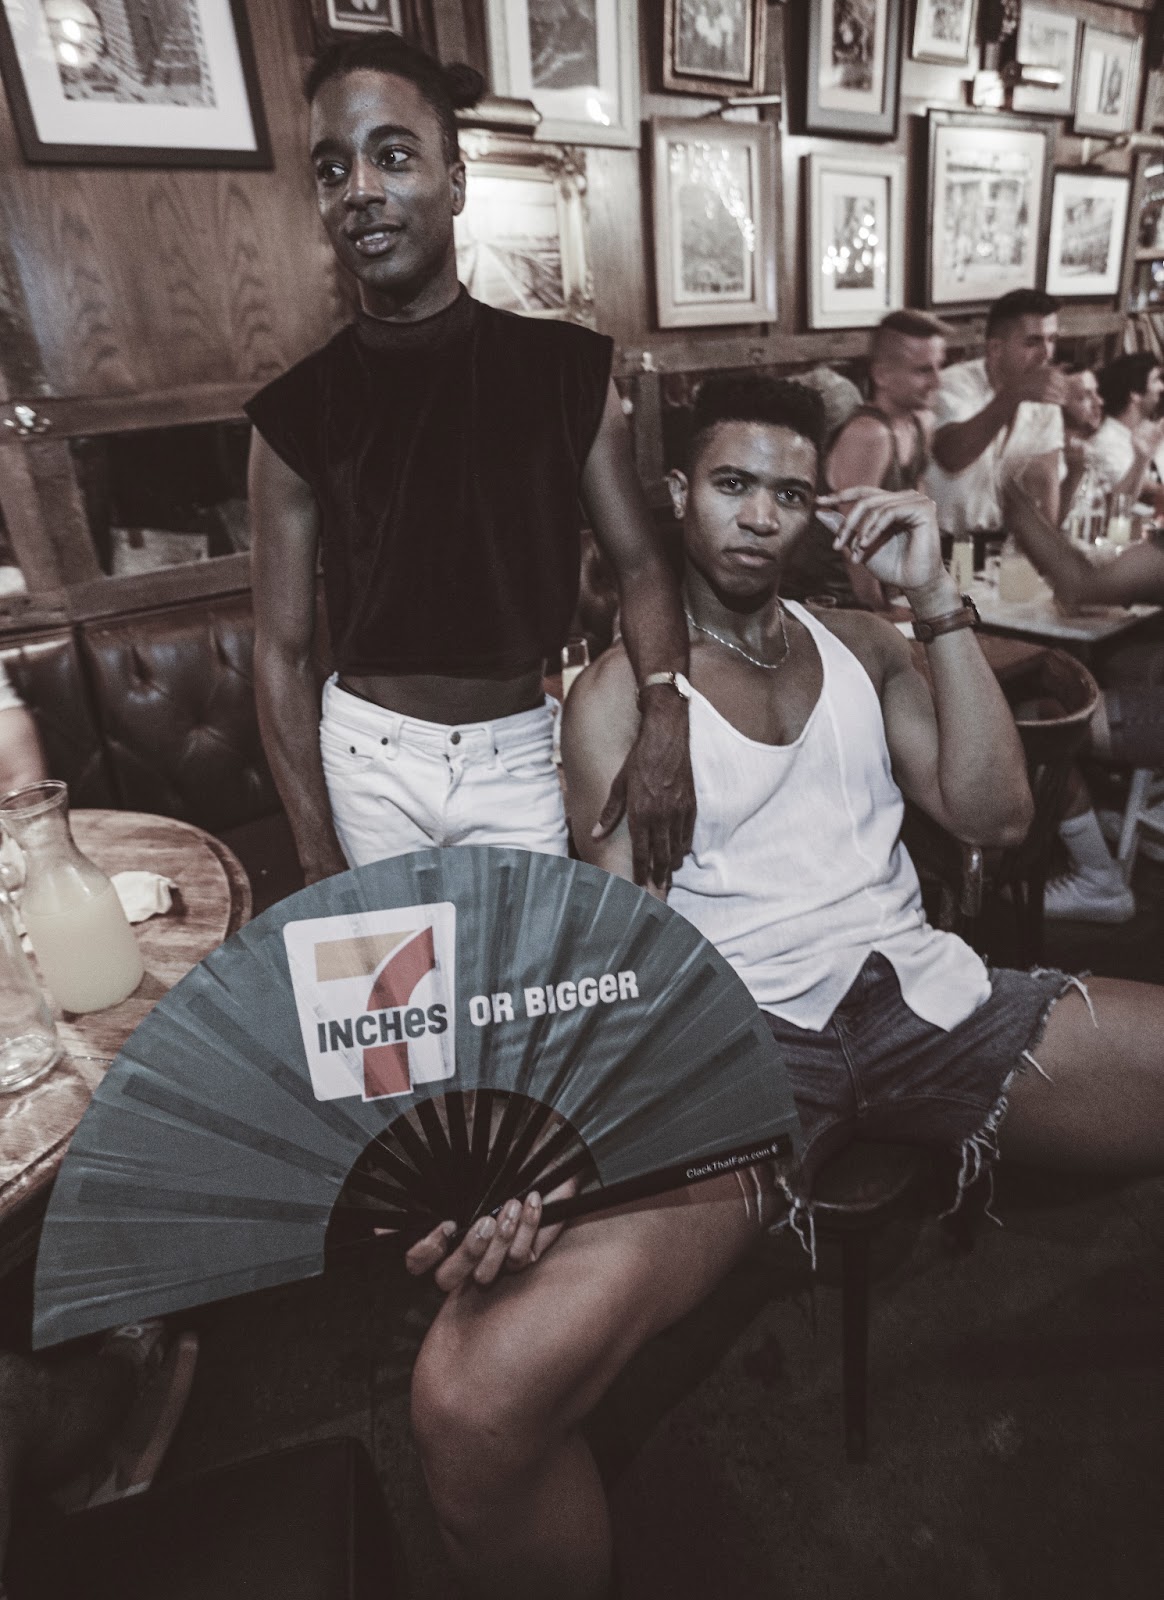 Men at a bar, one holds a fan that reads 